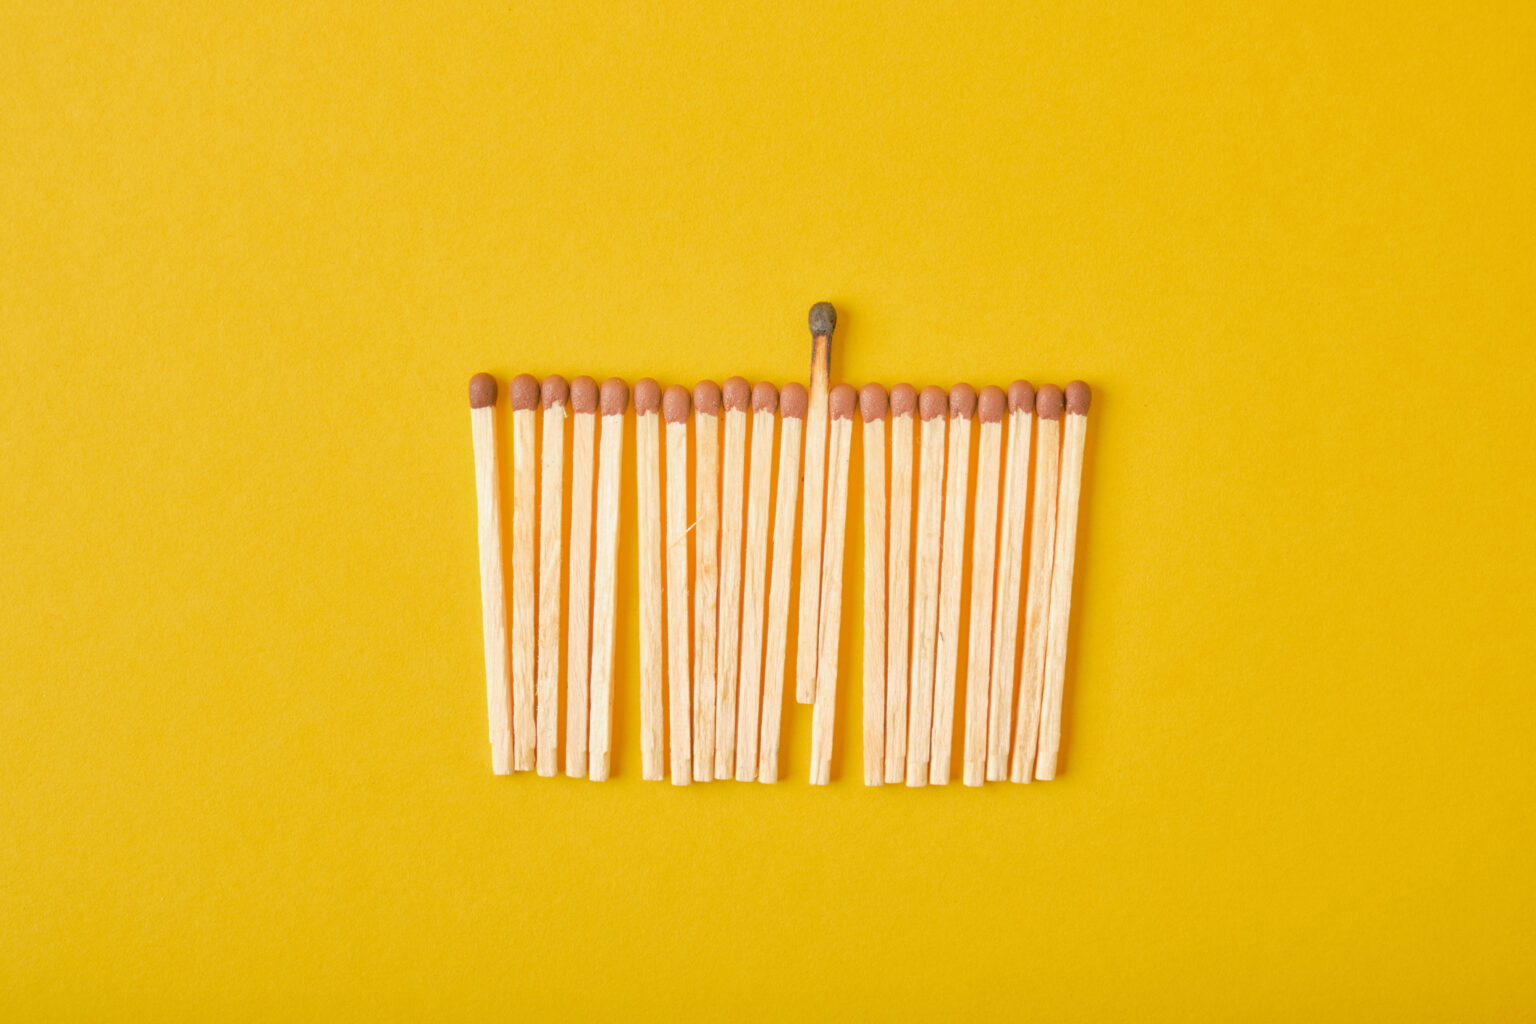 Matches, with one burnt on a yellow background